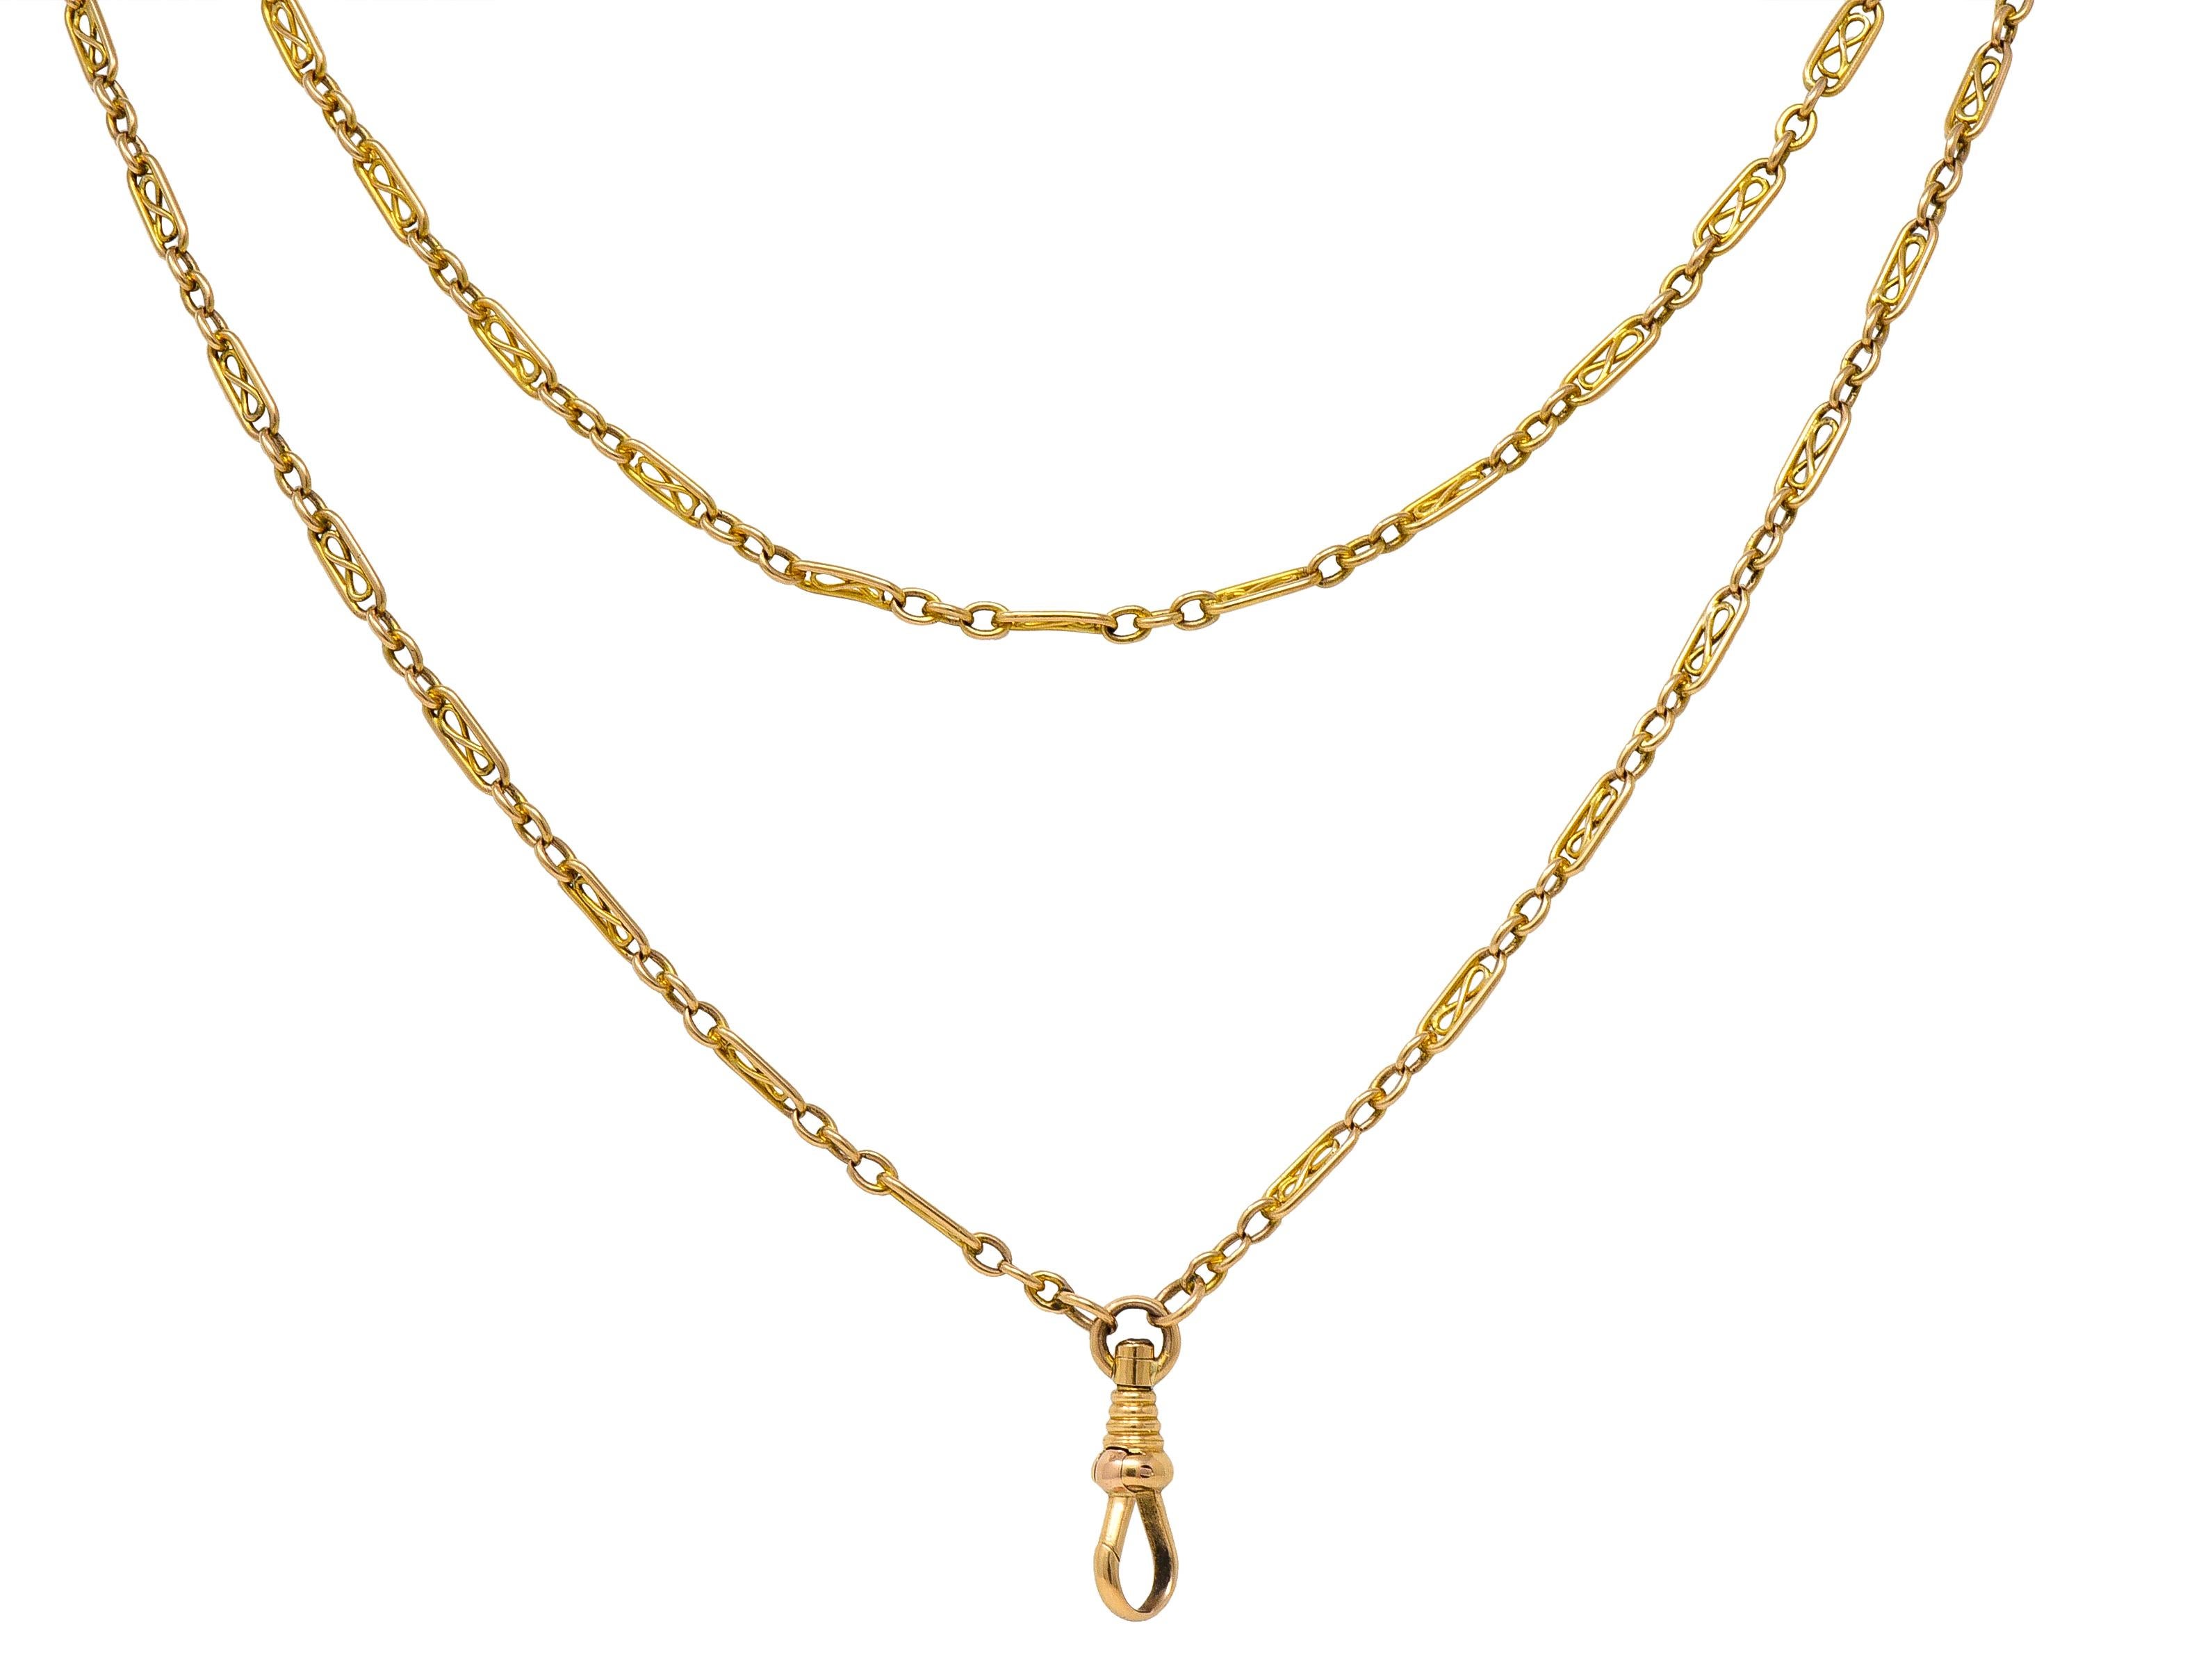 Victorian 14 Karat Yellow Gold Link 64 1/2 IN Long Antique Fob Chain Necklace For Sale 2